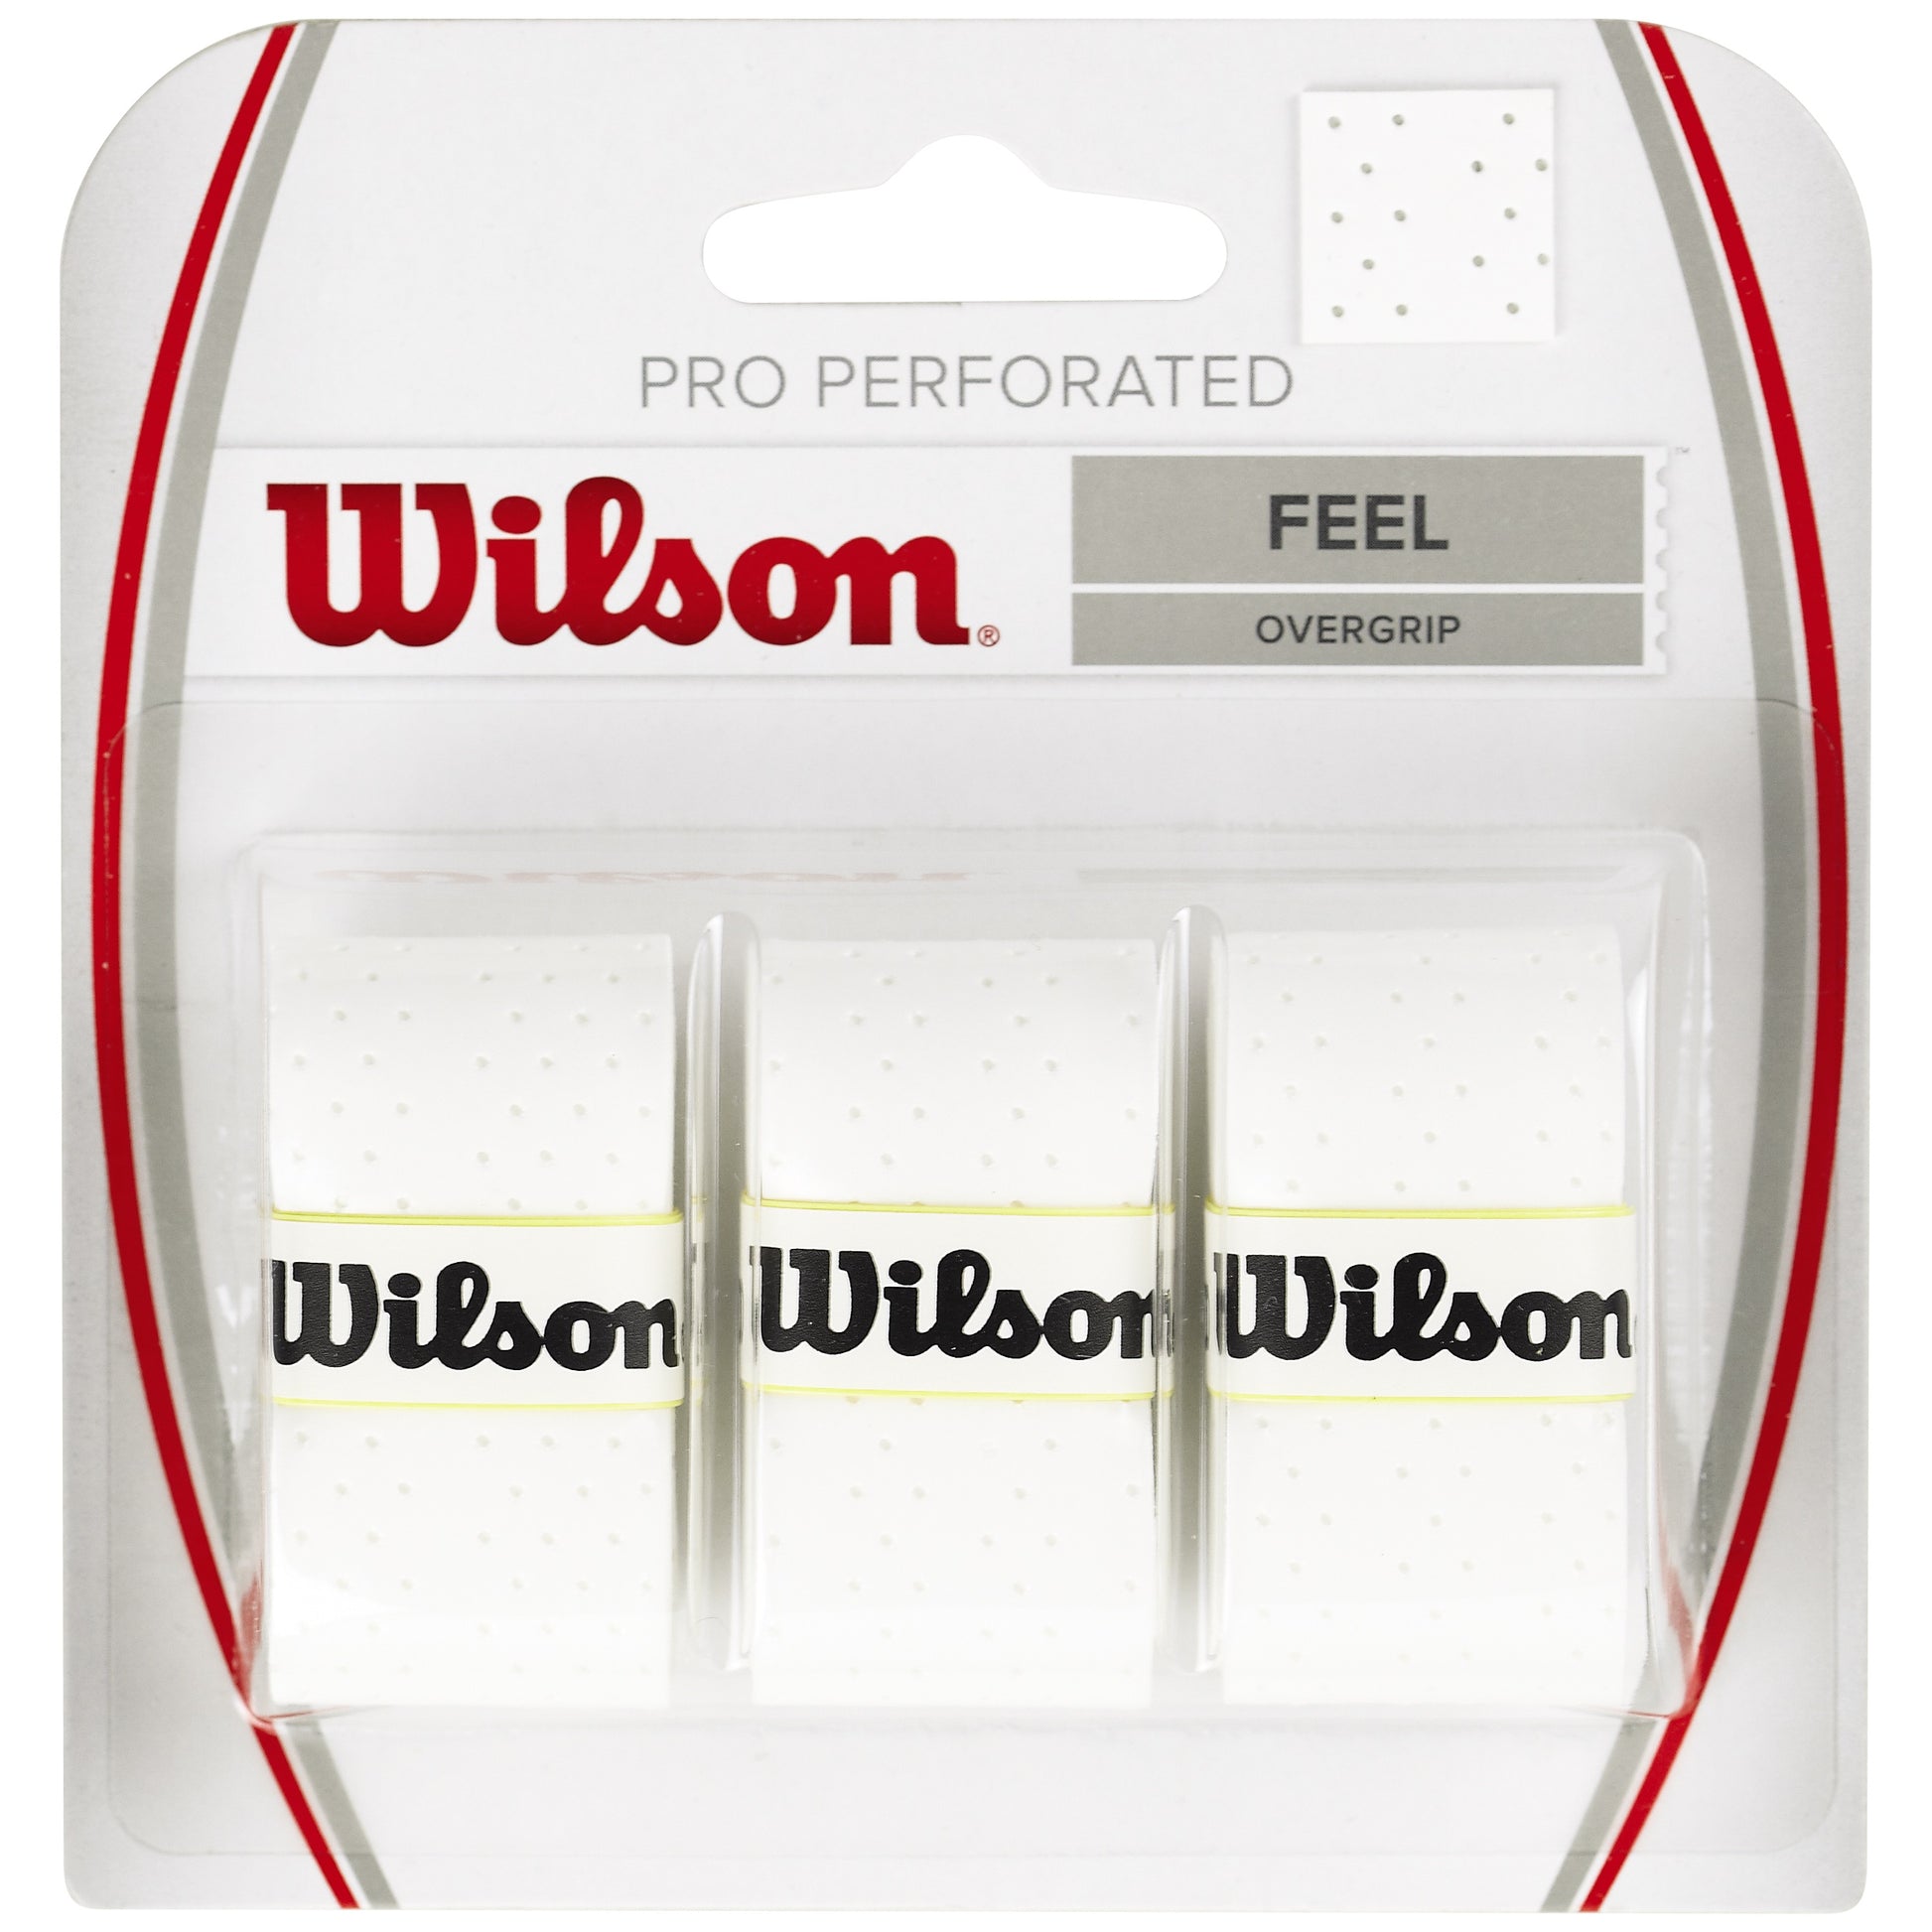 WILSON Pro Perforated Overgrip (3 pcs)